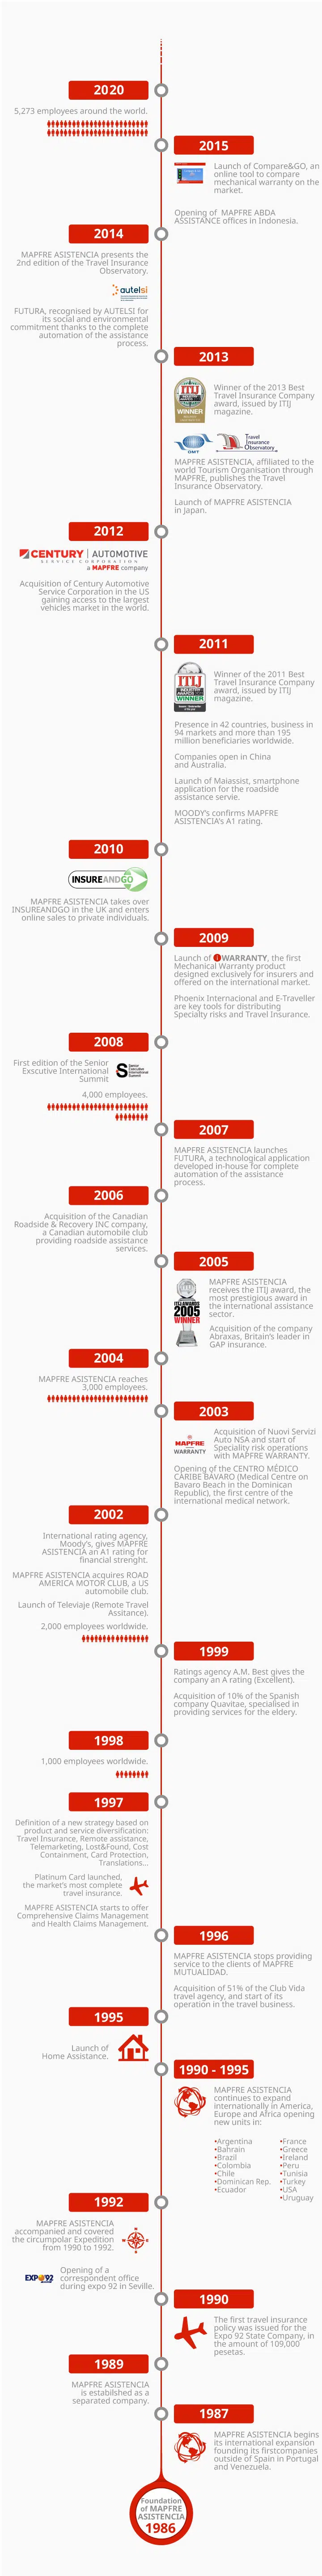 Infographic of the history of MAPFRE Assistance